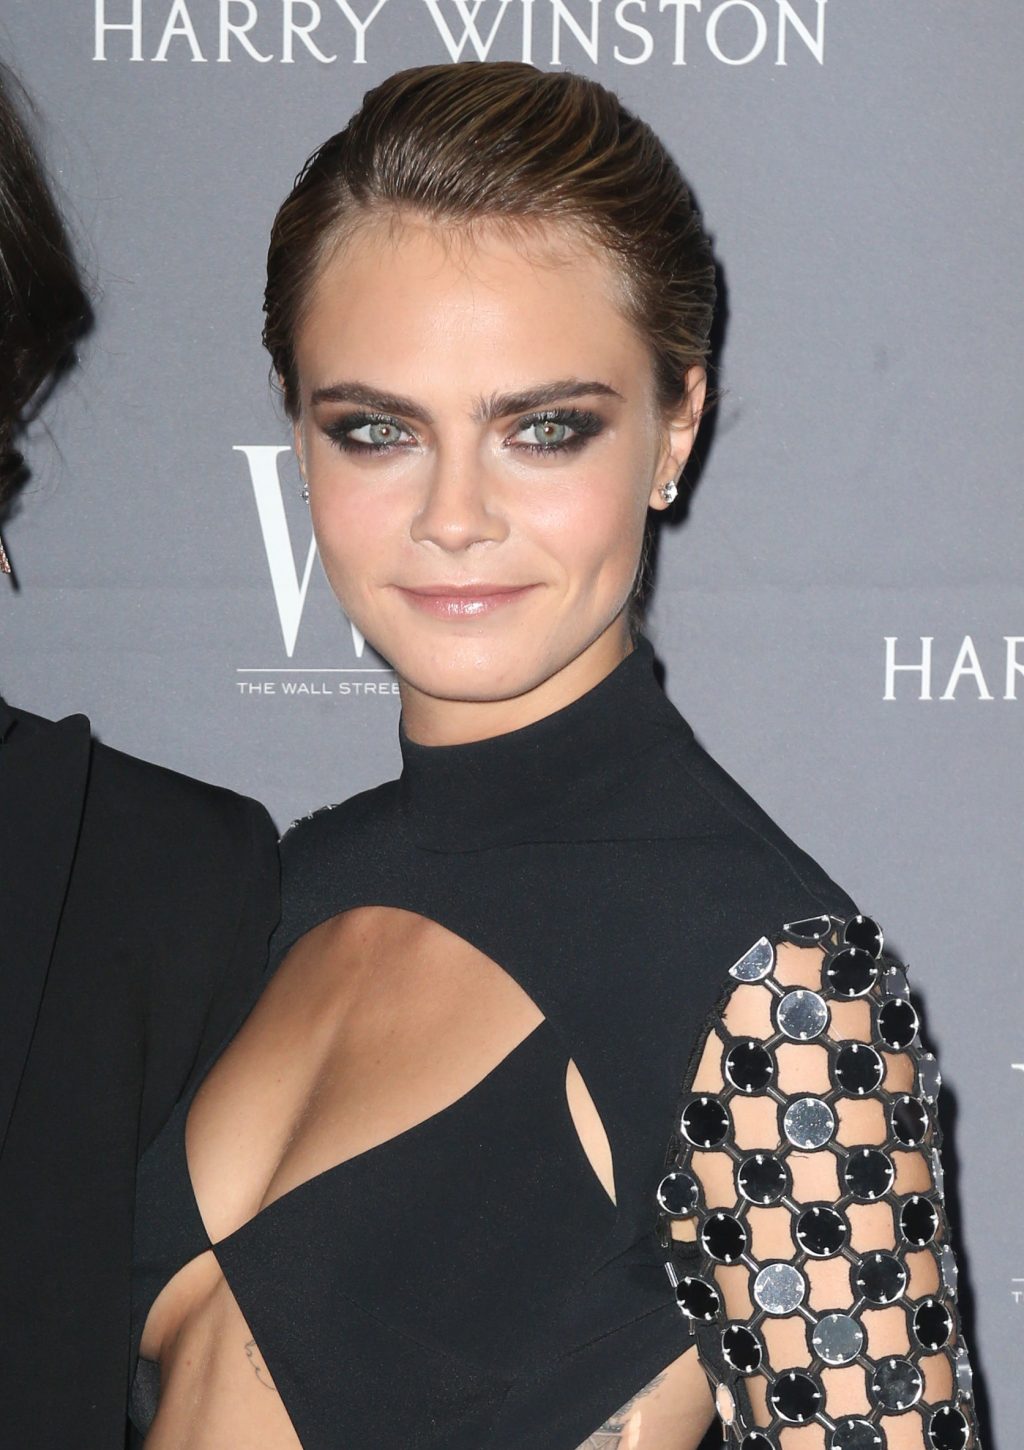 Cara Delevingne Sexy The Fappening 2014 2020 Celebrity Photo Leaks